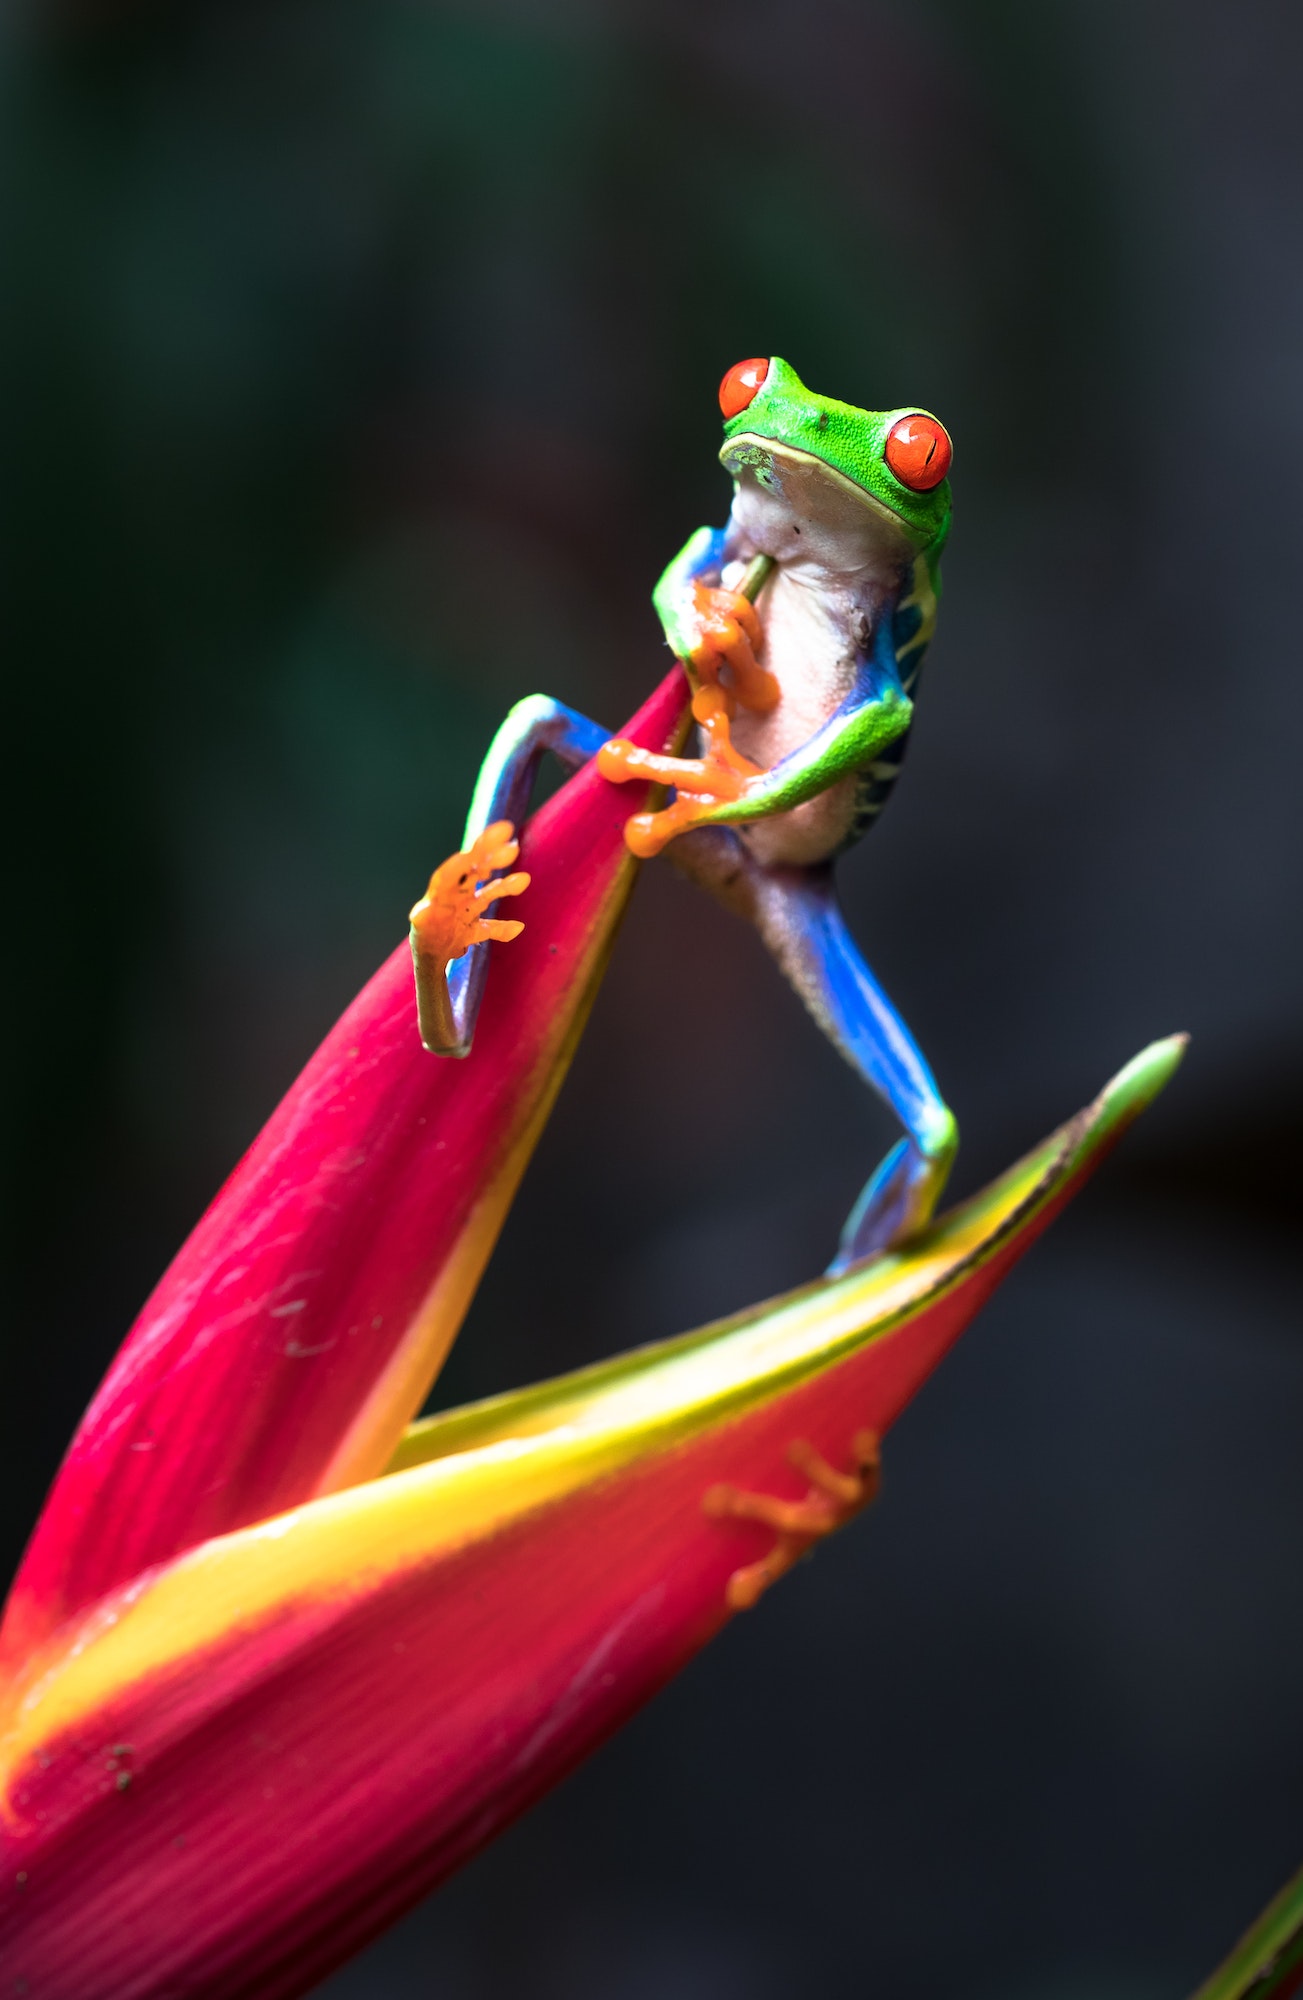 Red-eyed Tree Frog Climbs a Heliconia Flower in Costa Rica